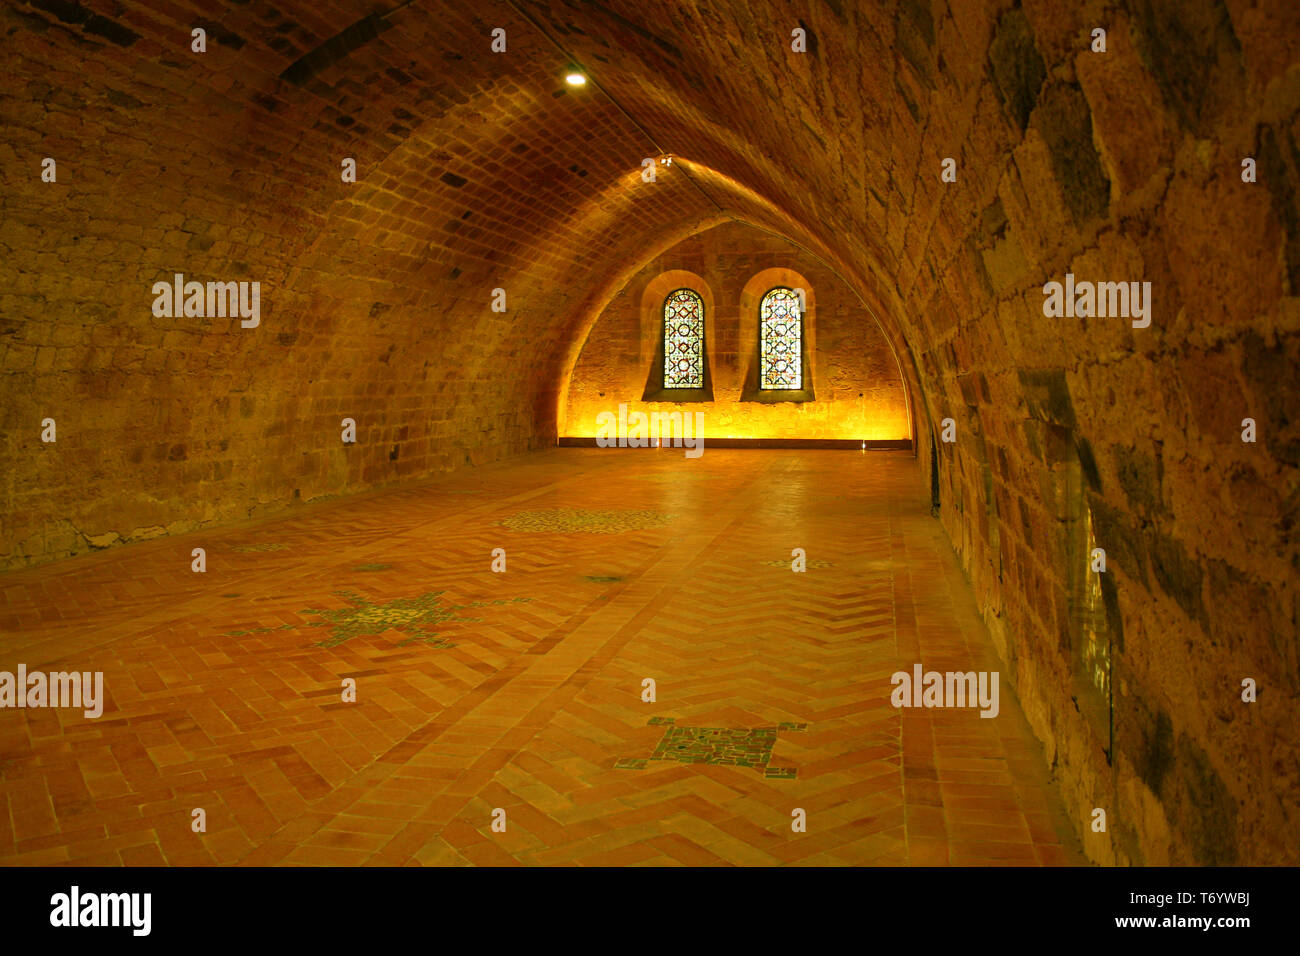 Abbey Fontfroide Narbonne, France Stock Photo